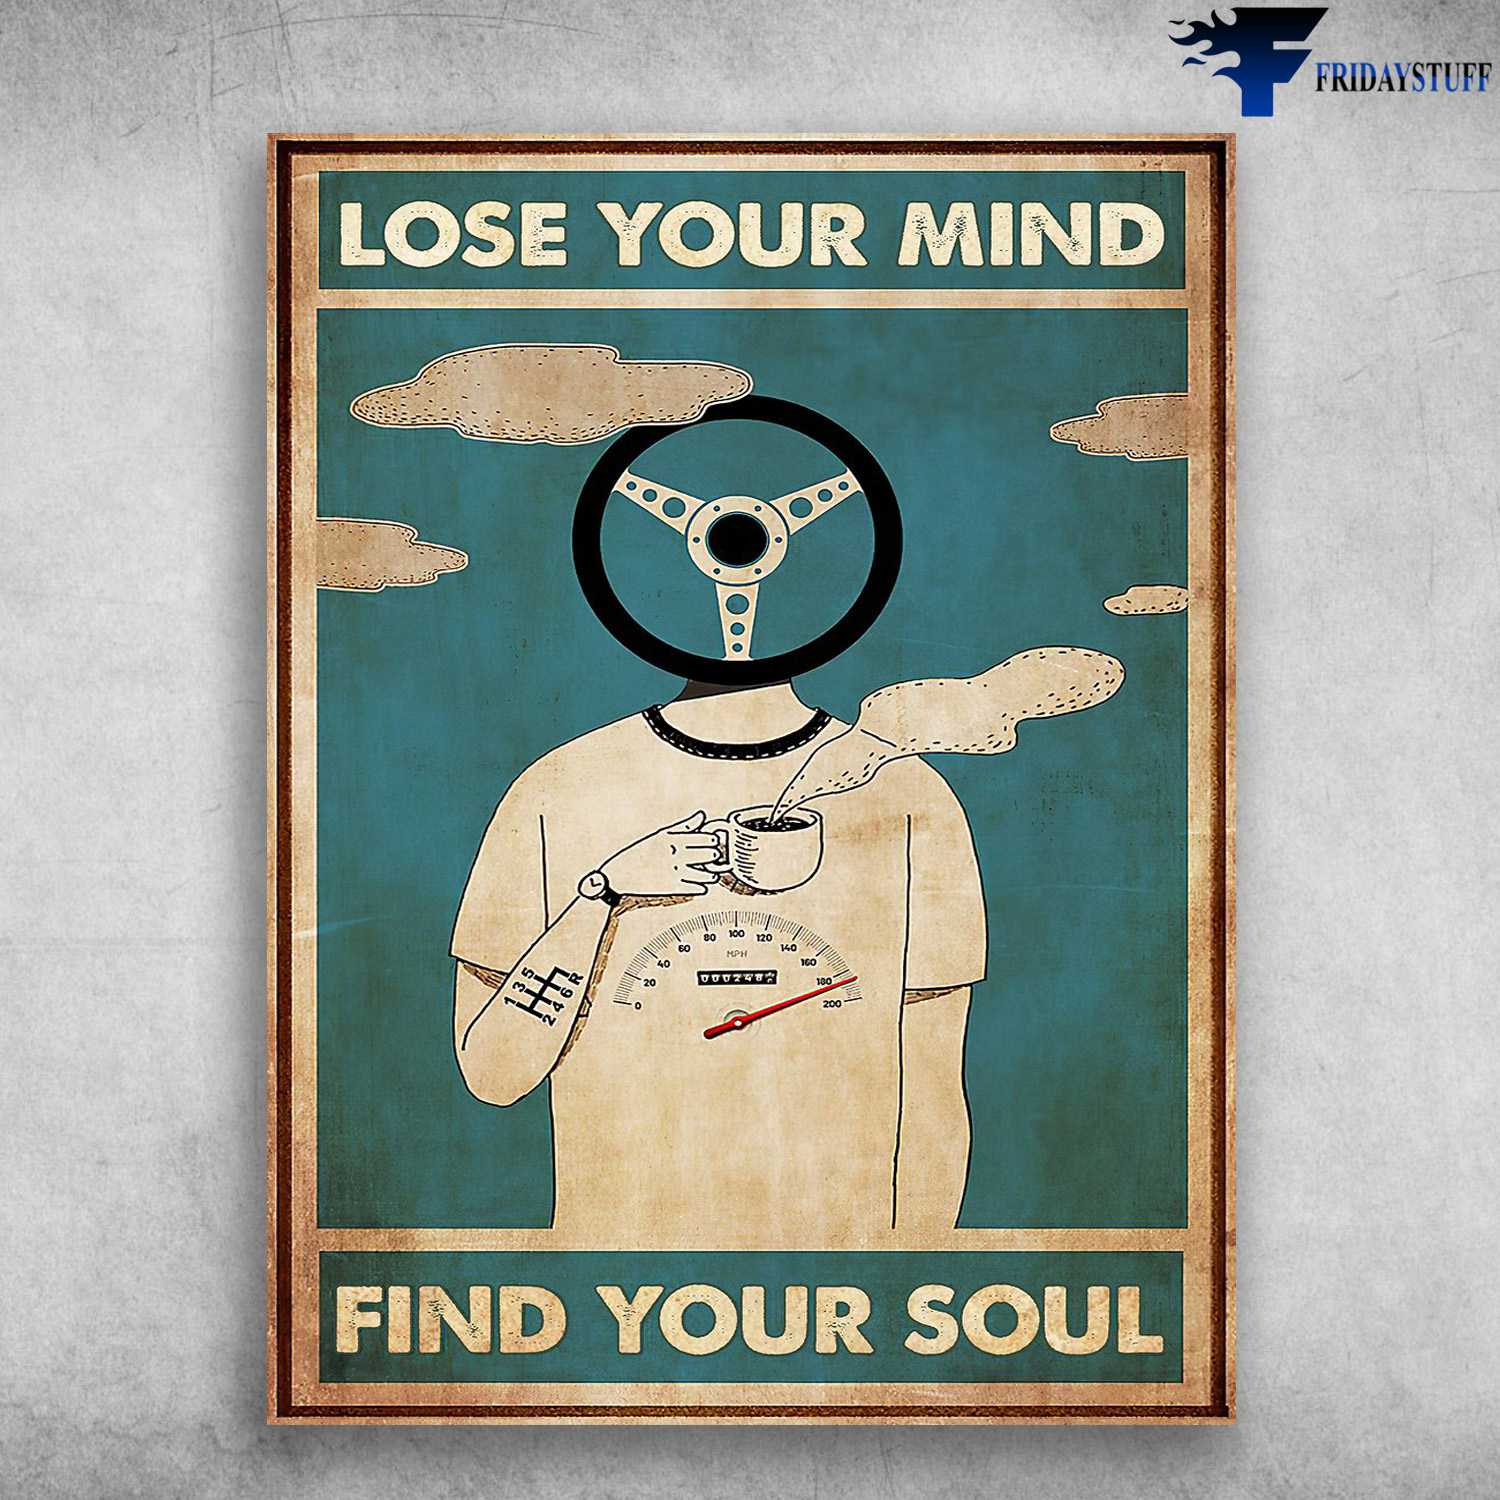 Driver Poster, Car Driving - Lose Your Mind, Find Your Soul